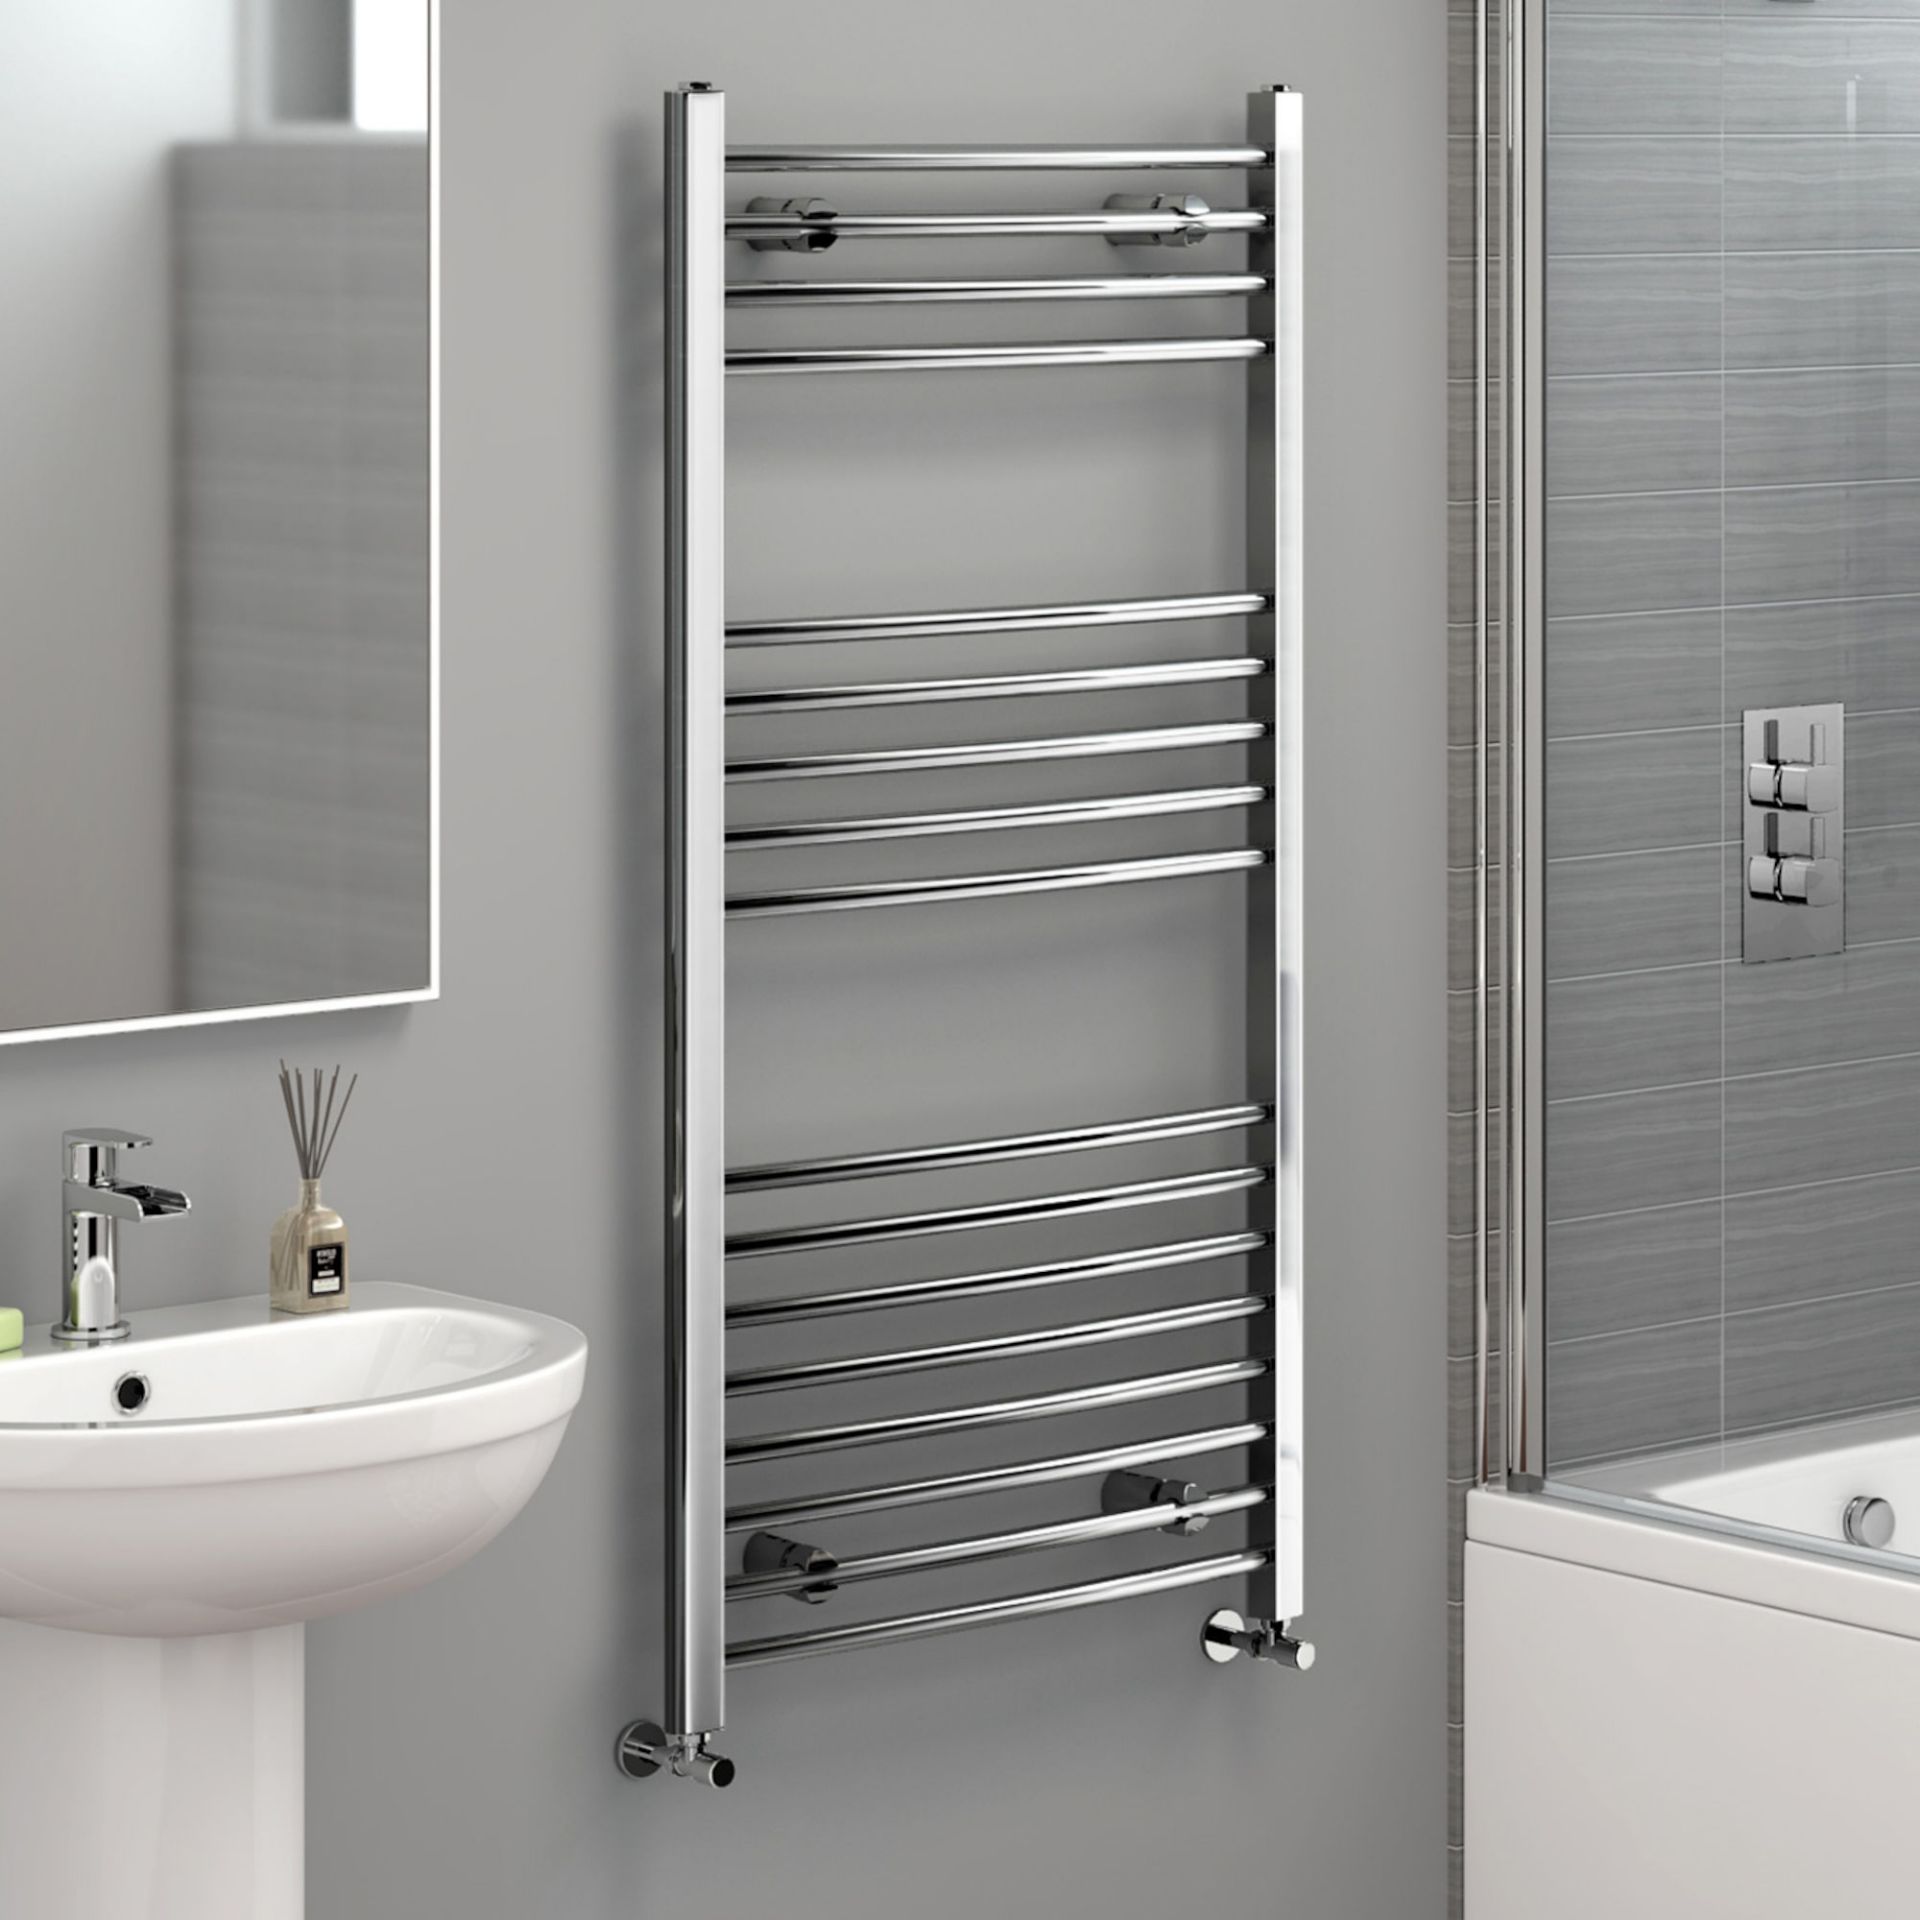 1200x600mm - 20mm Tubes - Chrome Curved Rail Ladder Towel Radiator.NC1200600. Made from chrom...